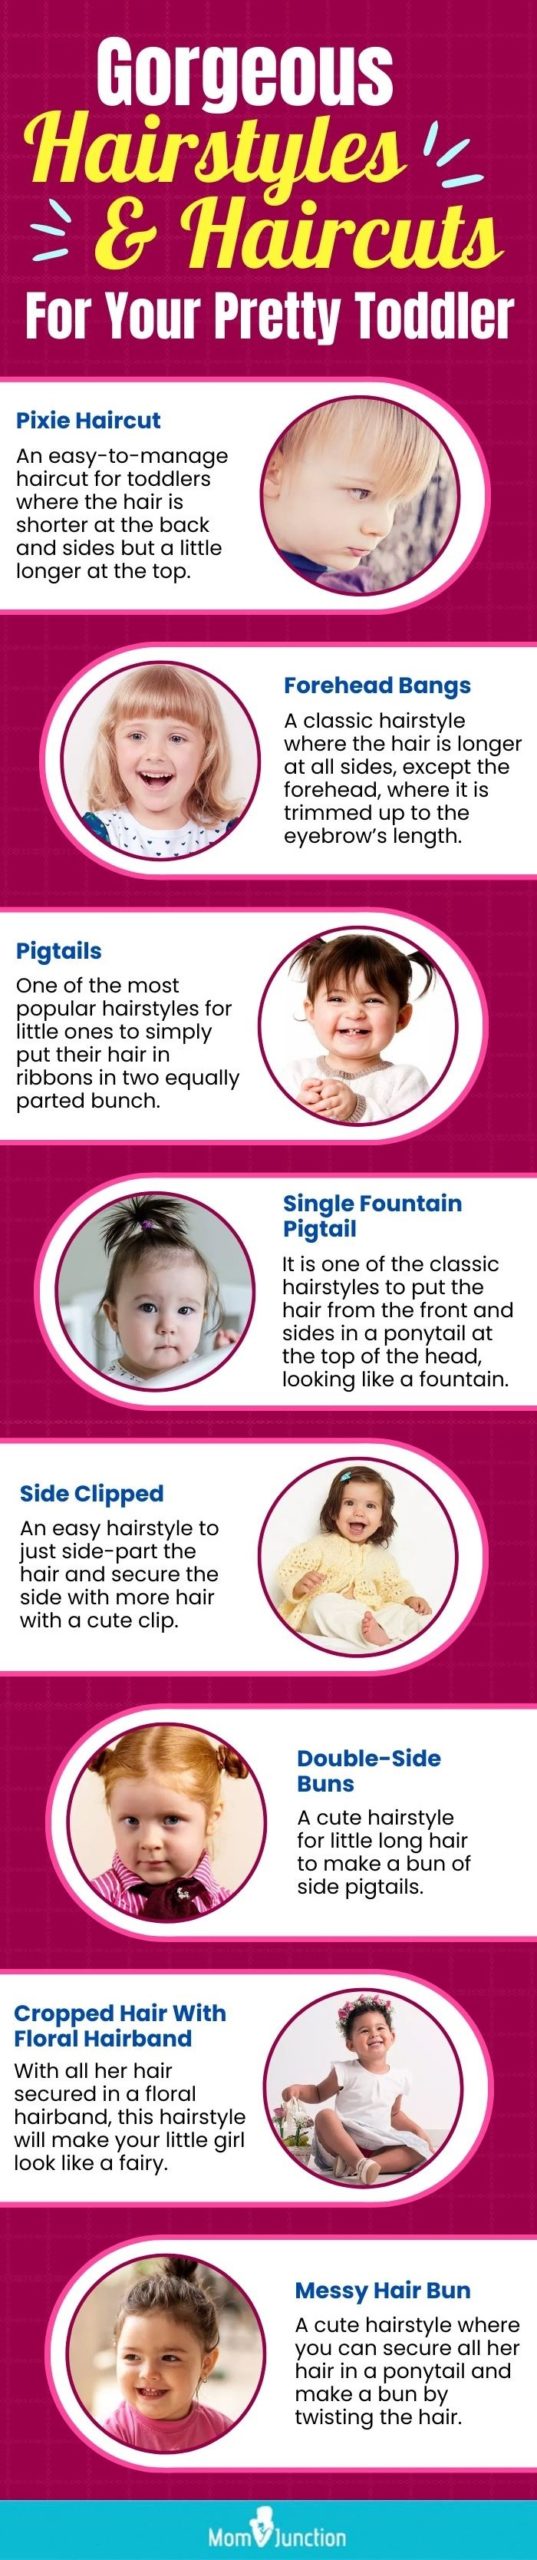 gorgeous hairstyles and haircuts for your pretty toddler (infographic)